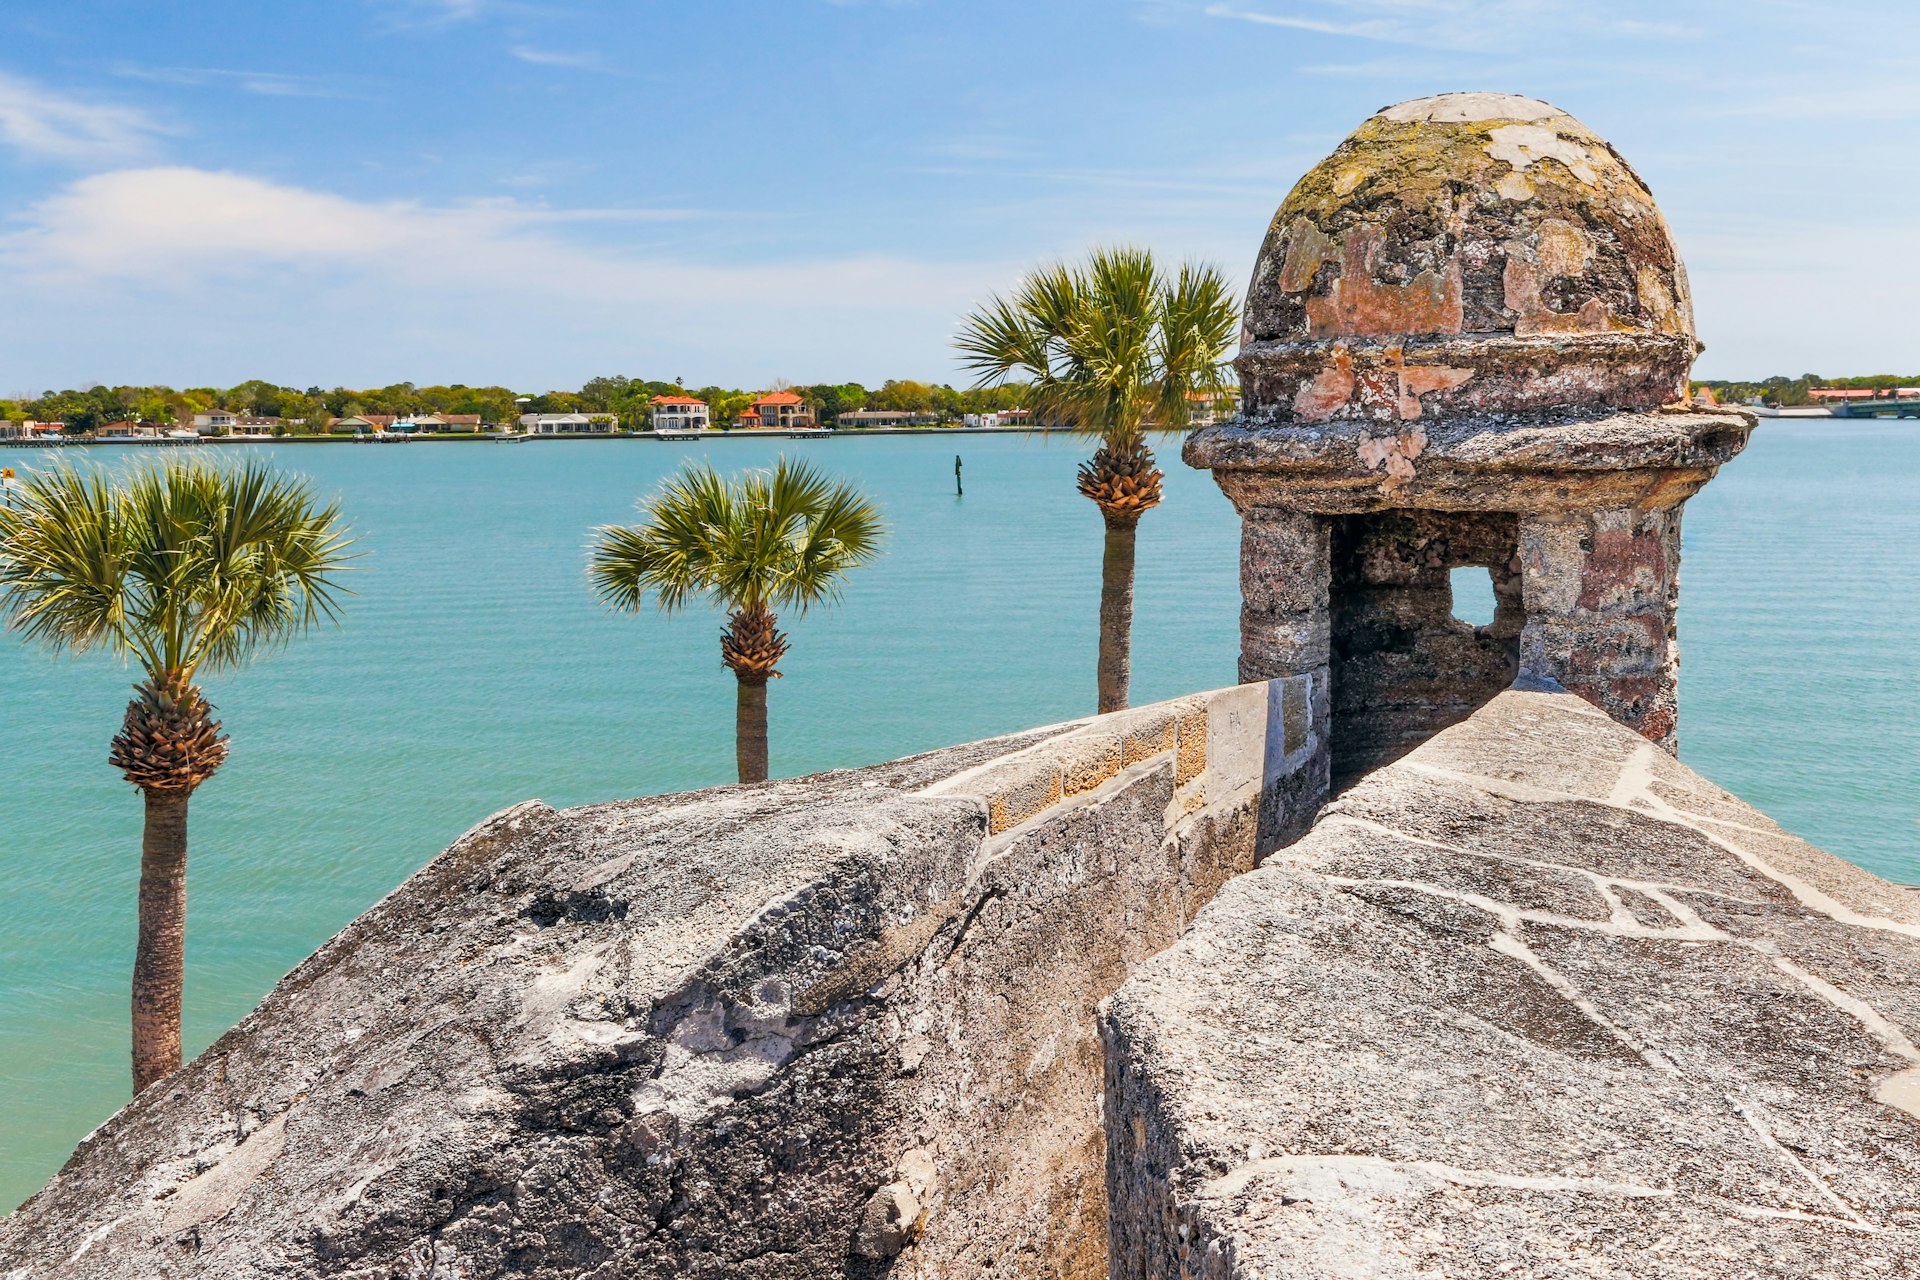 A shot taken from a stone fortress with a rounded sentry turret in the foreground. A palm-tree-lined bay of water stands behind the fort